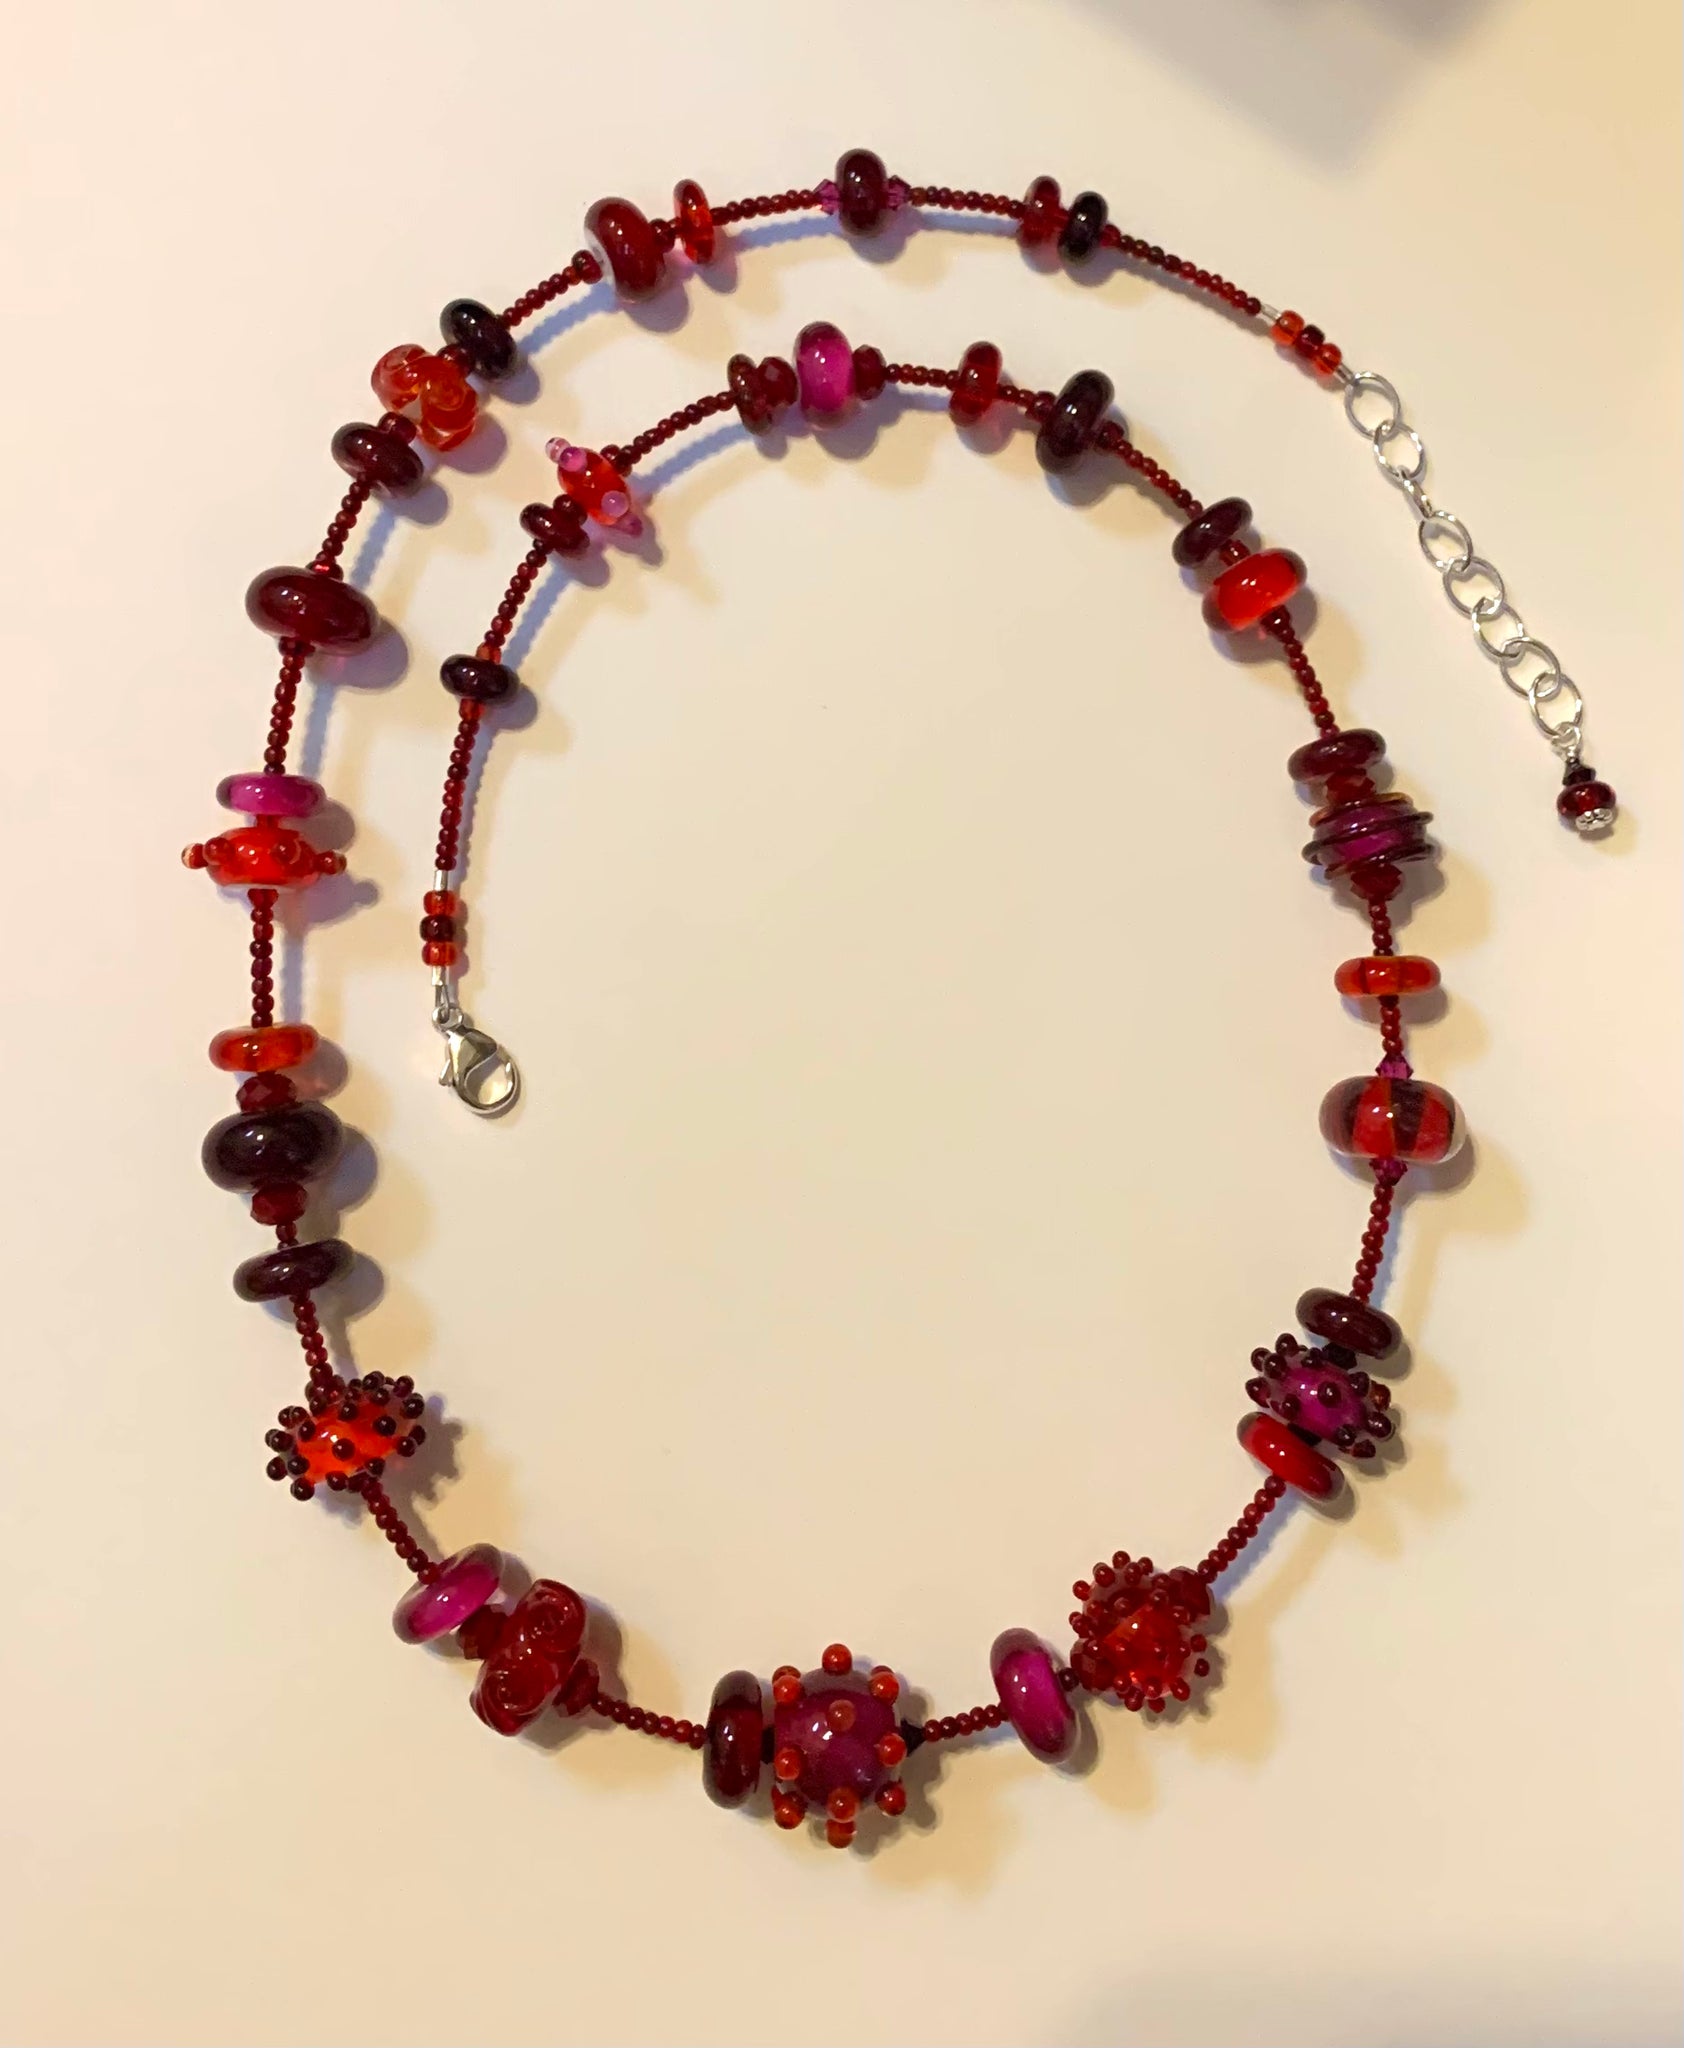 Red, garnet and fuchsia necklace